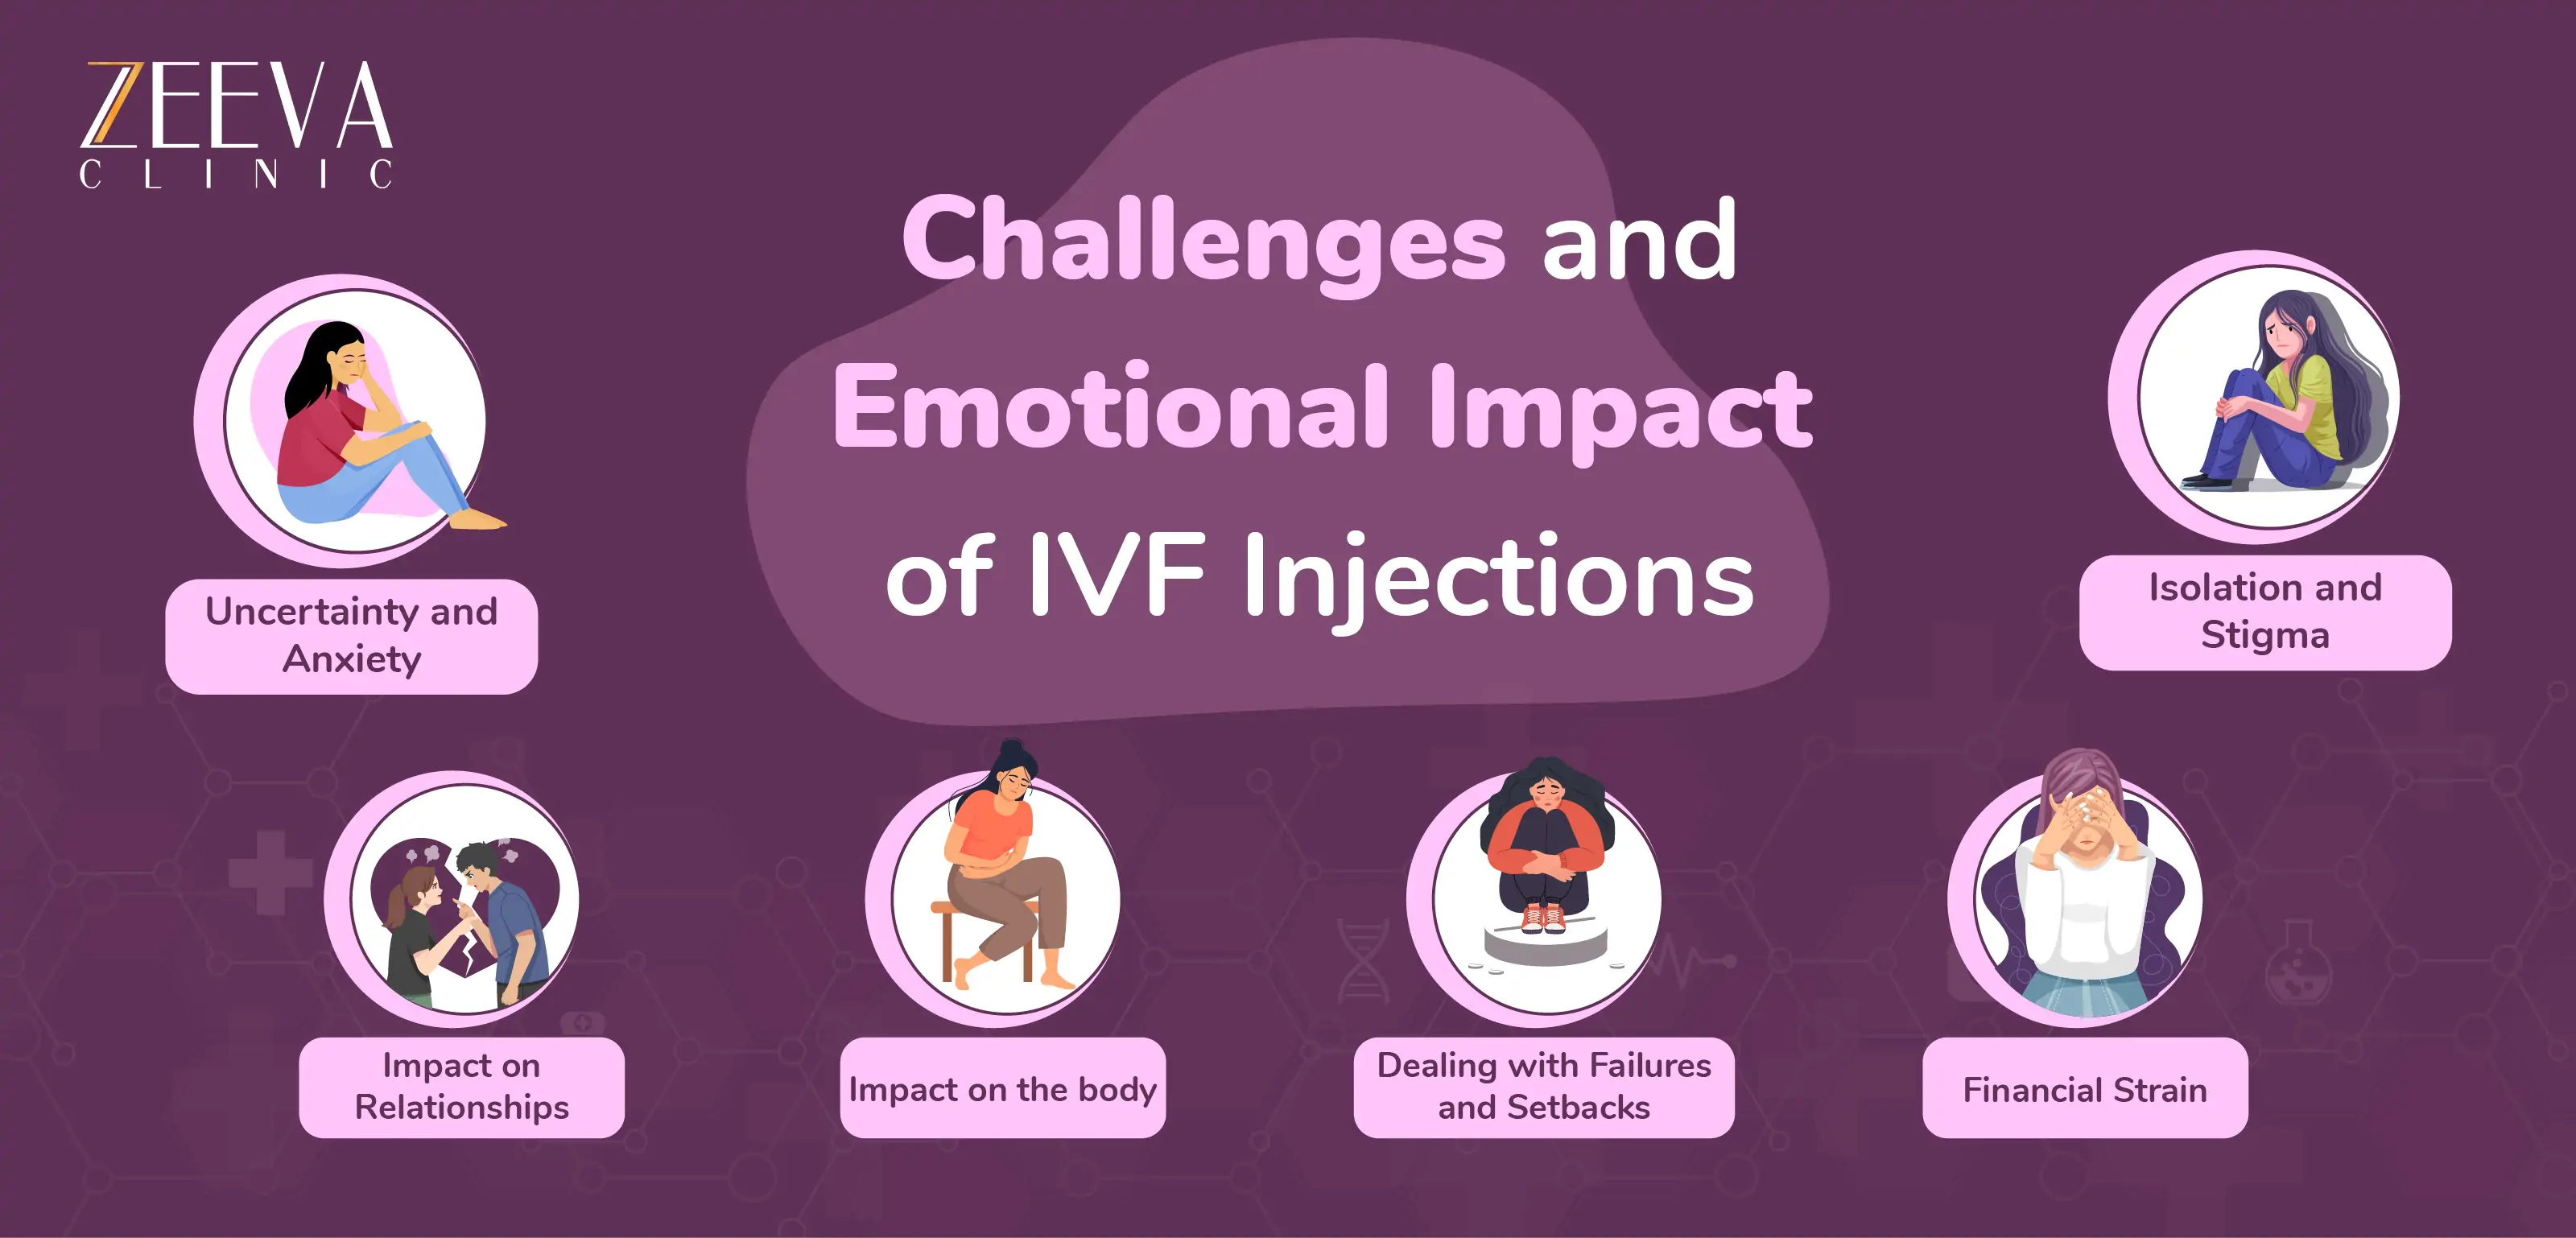 Emotional impact of IVF injections